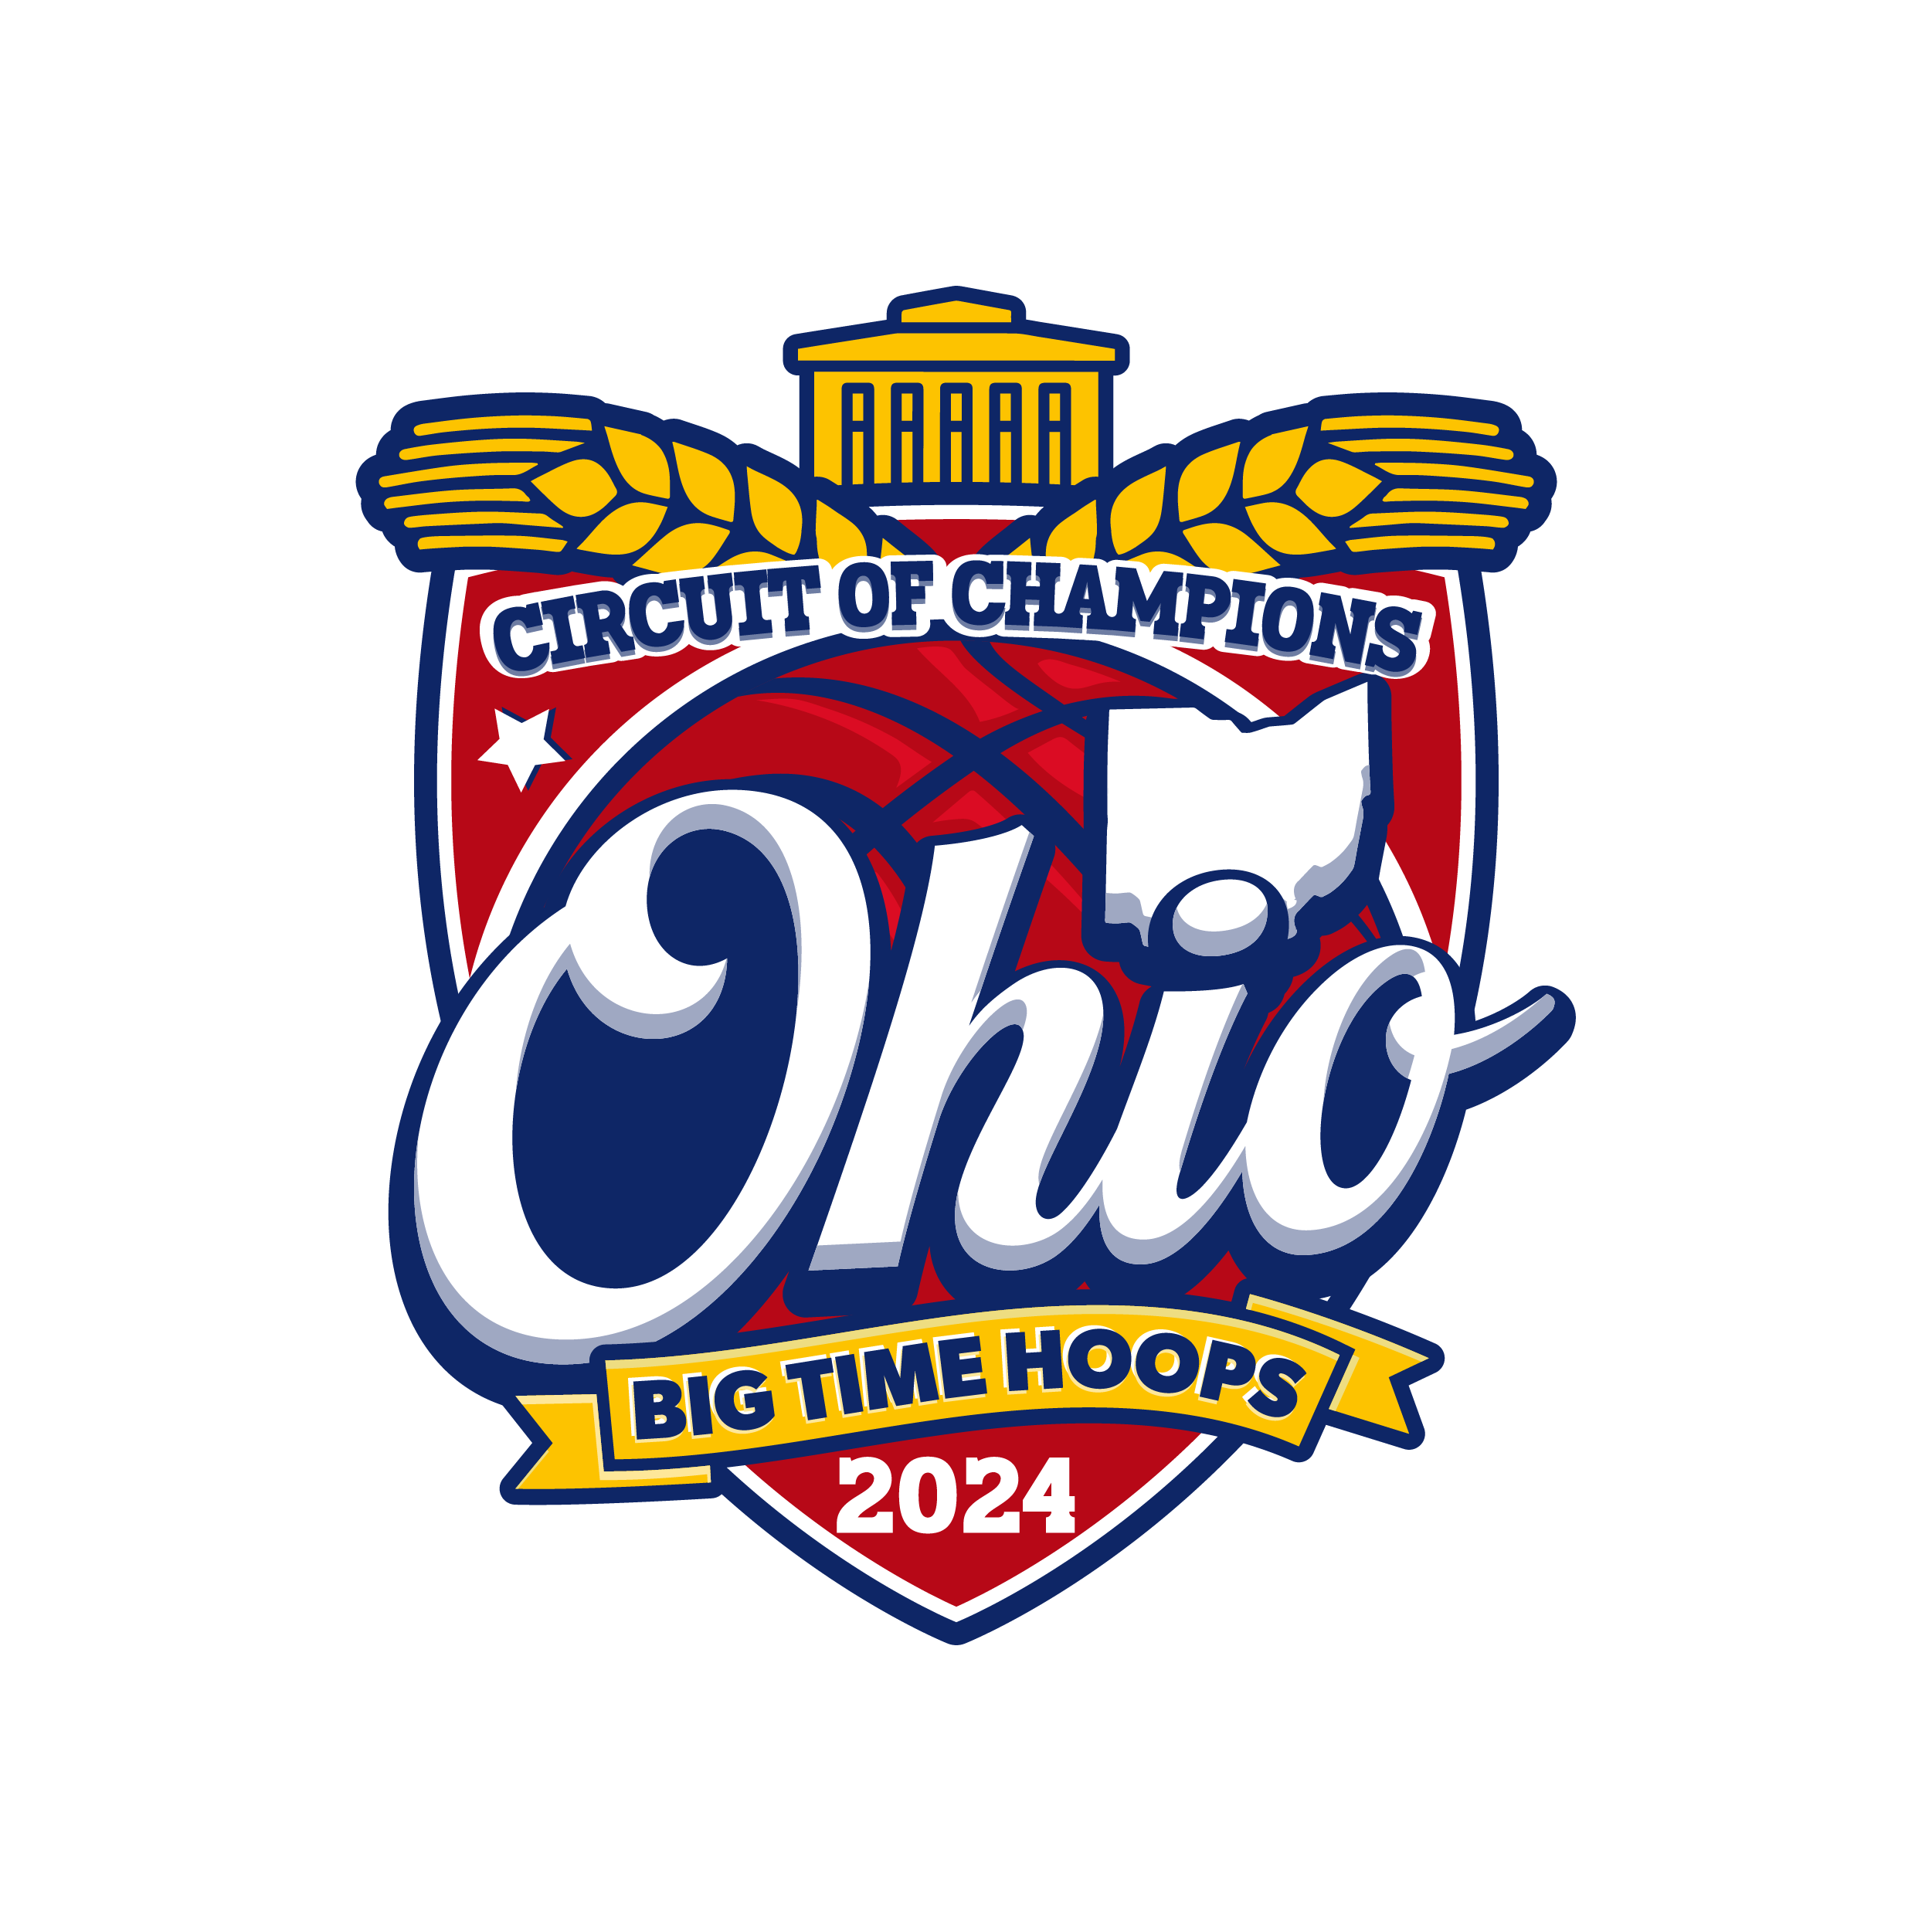 circuit of champions Ohio by Big Time Hoops